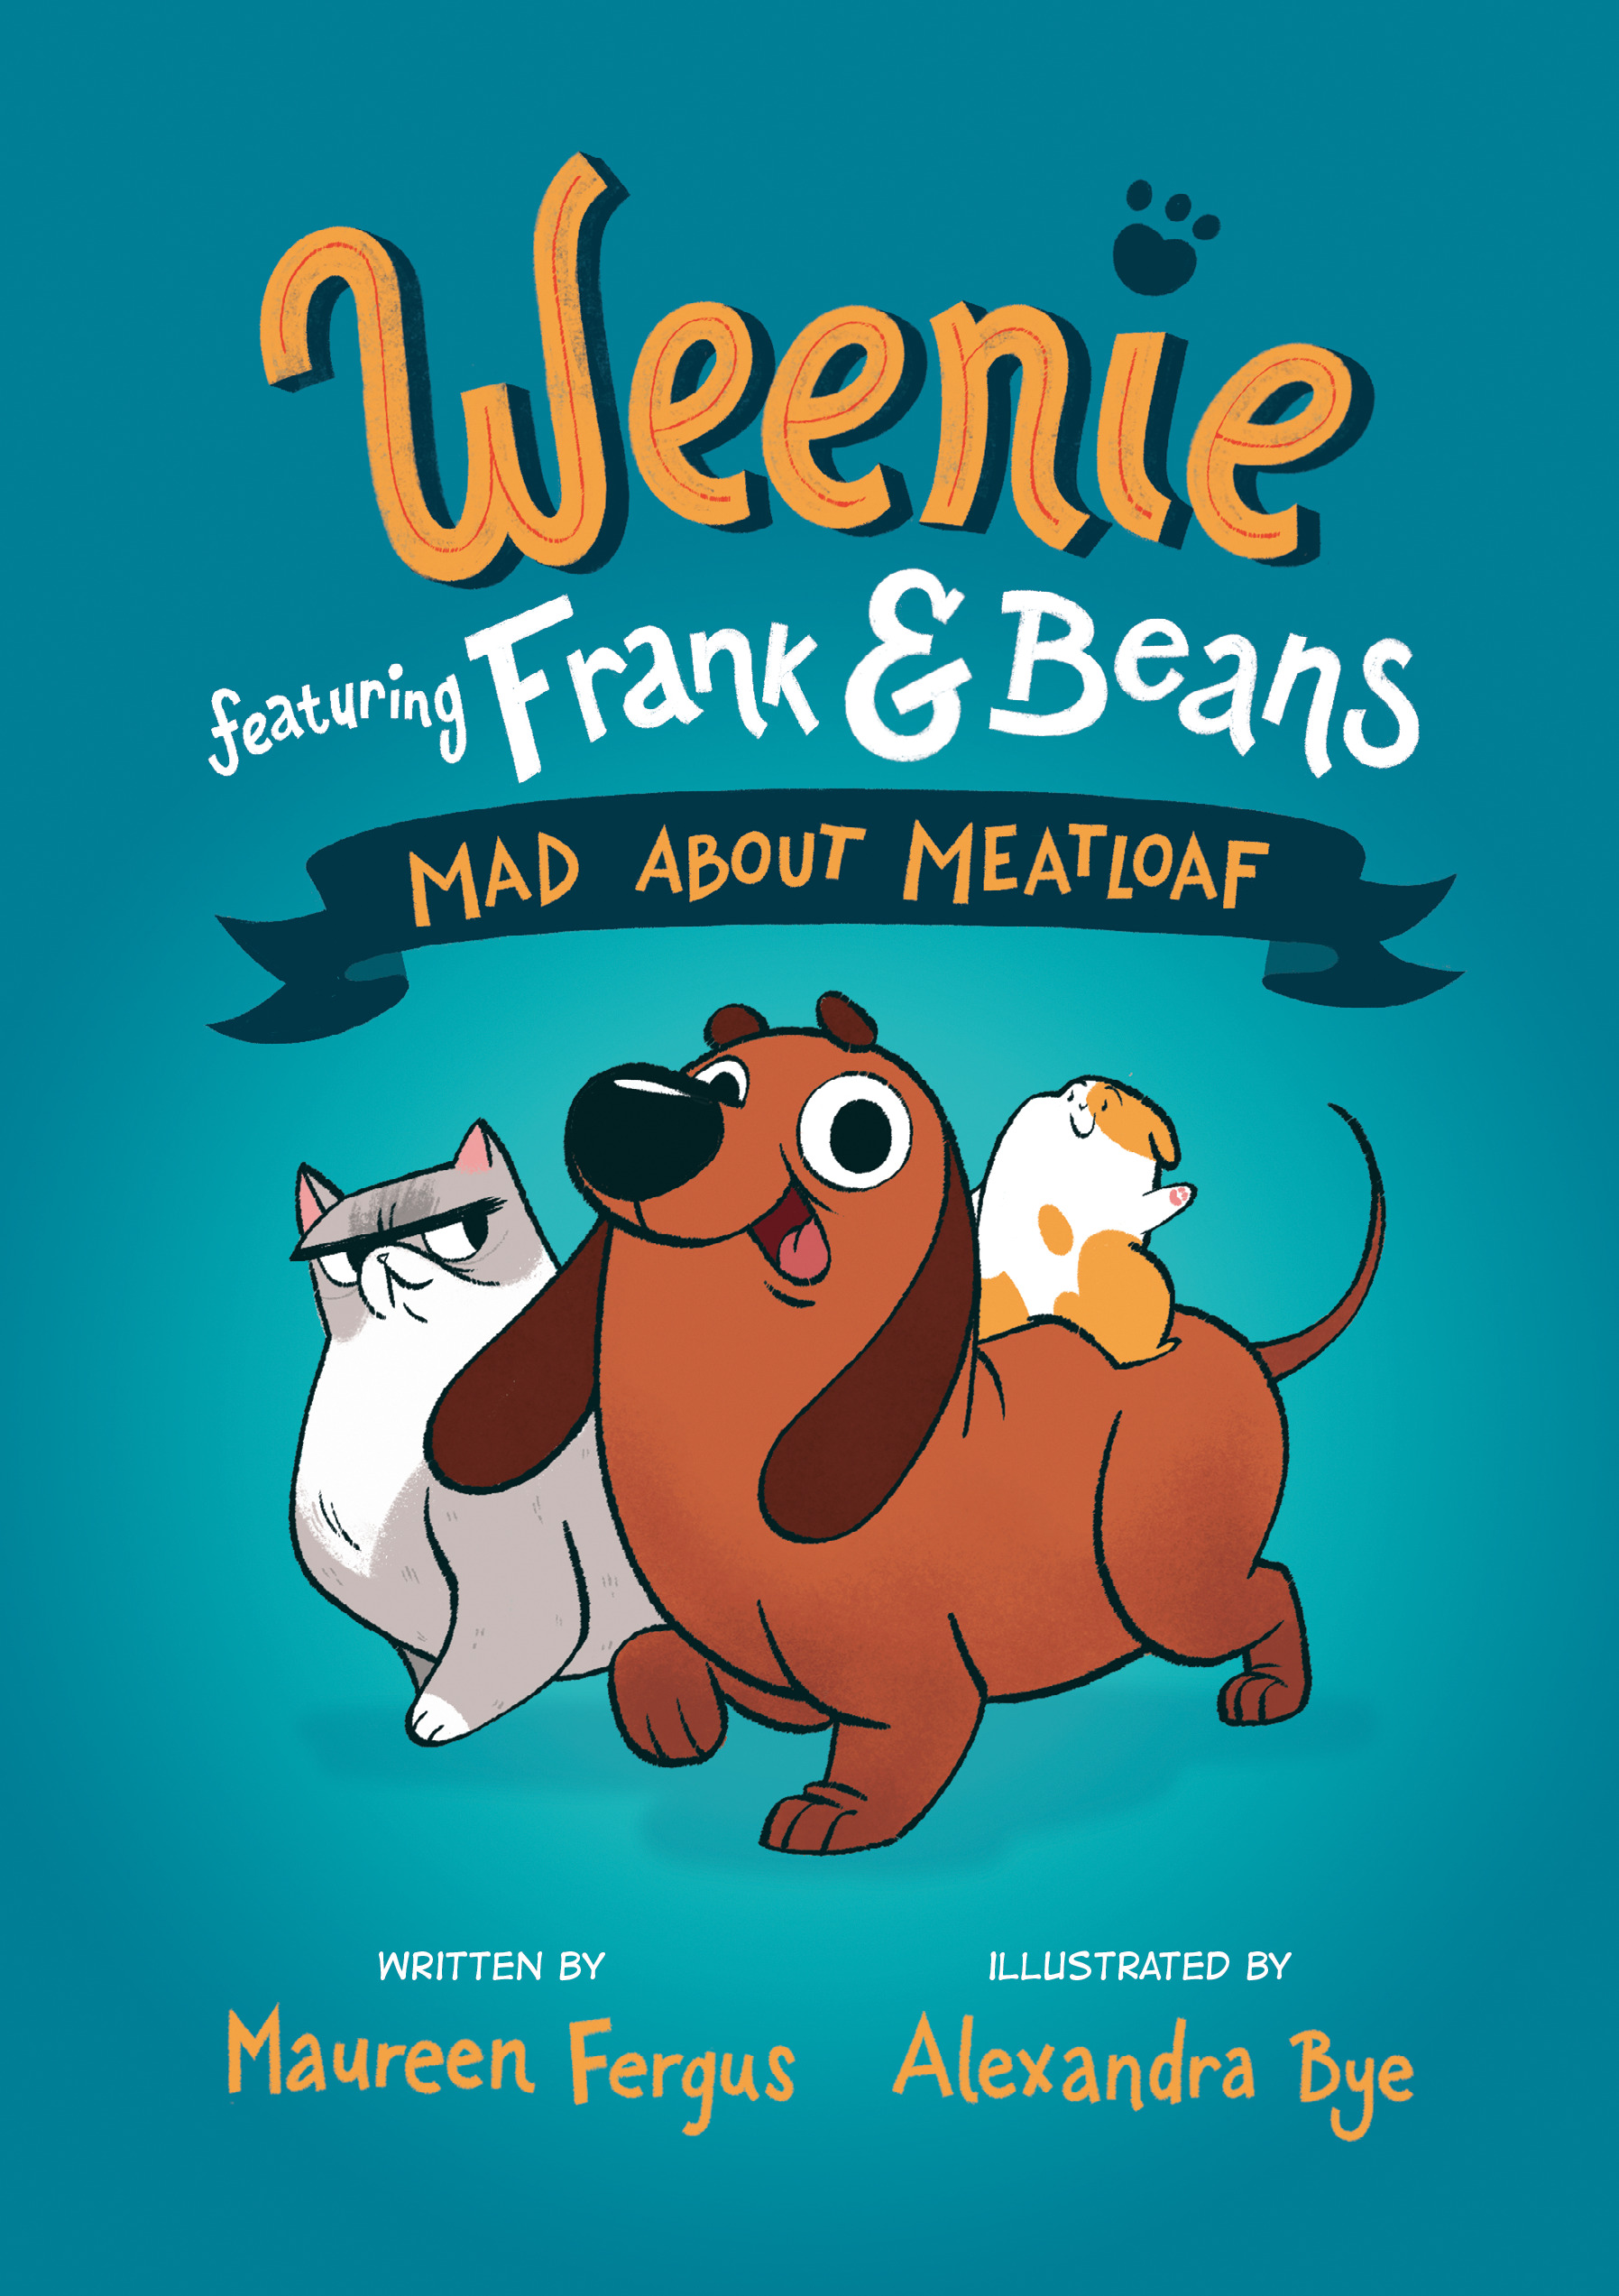 Mad About Meatloaf (Weenie Featuring Frank and Beans Book #1) | Fergus, Maureen